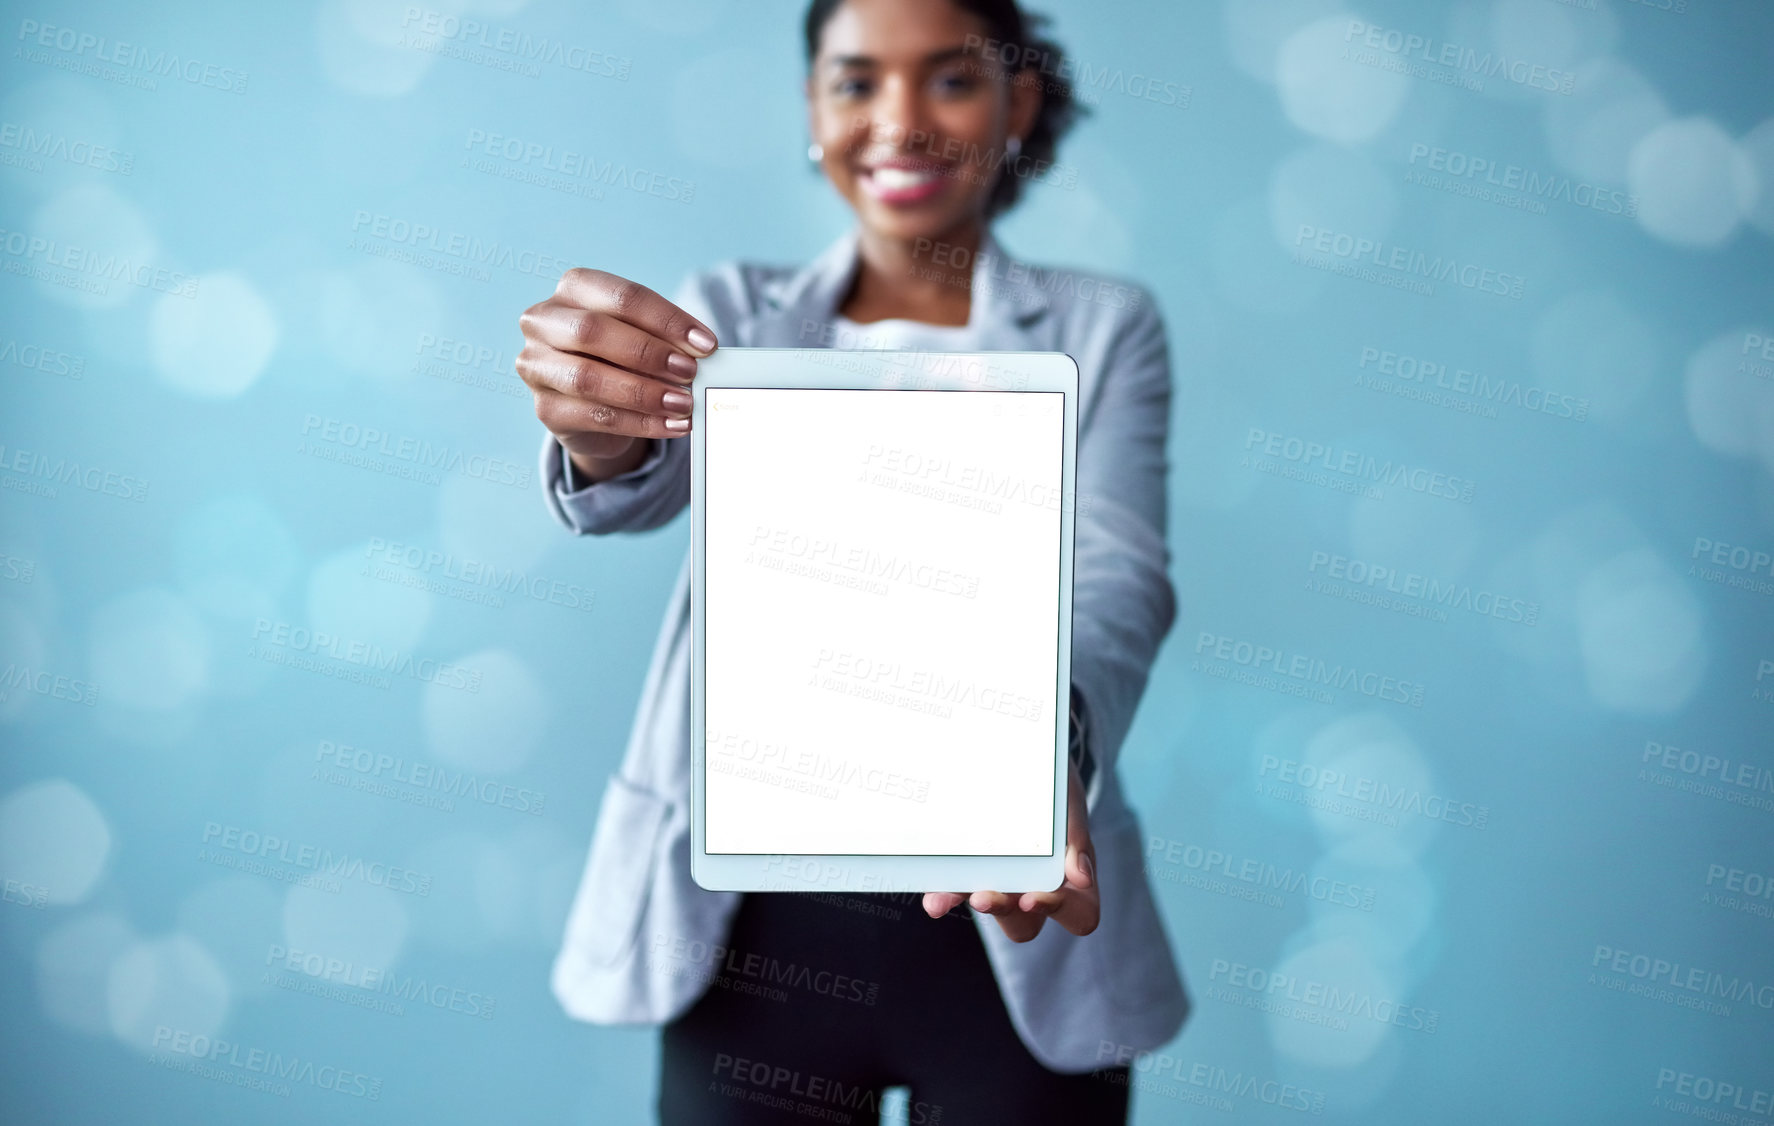 Buy stock photo Blank screen and copyspace on a tablet screen with a woman showing a digital device. Closeup of female hands holding tech product. Portrait of a smiling person posing with and embracing technology